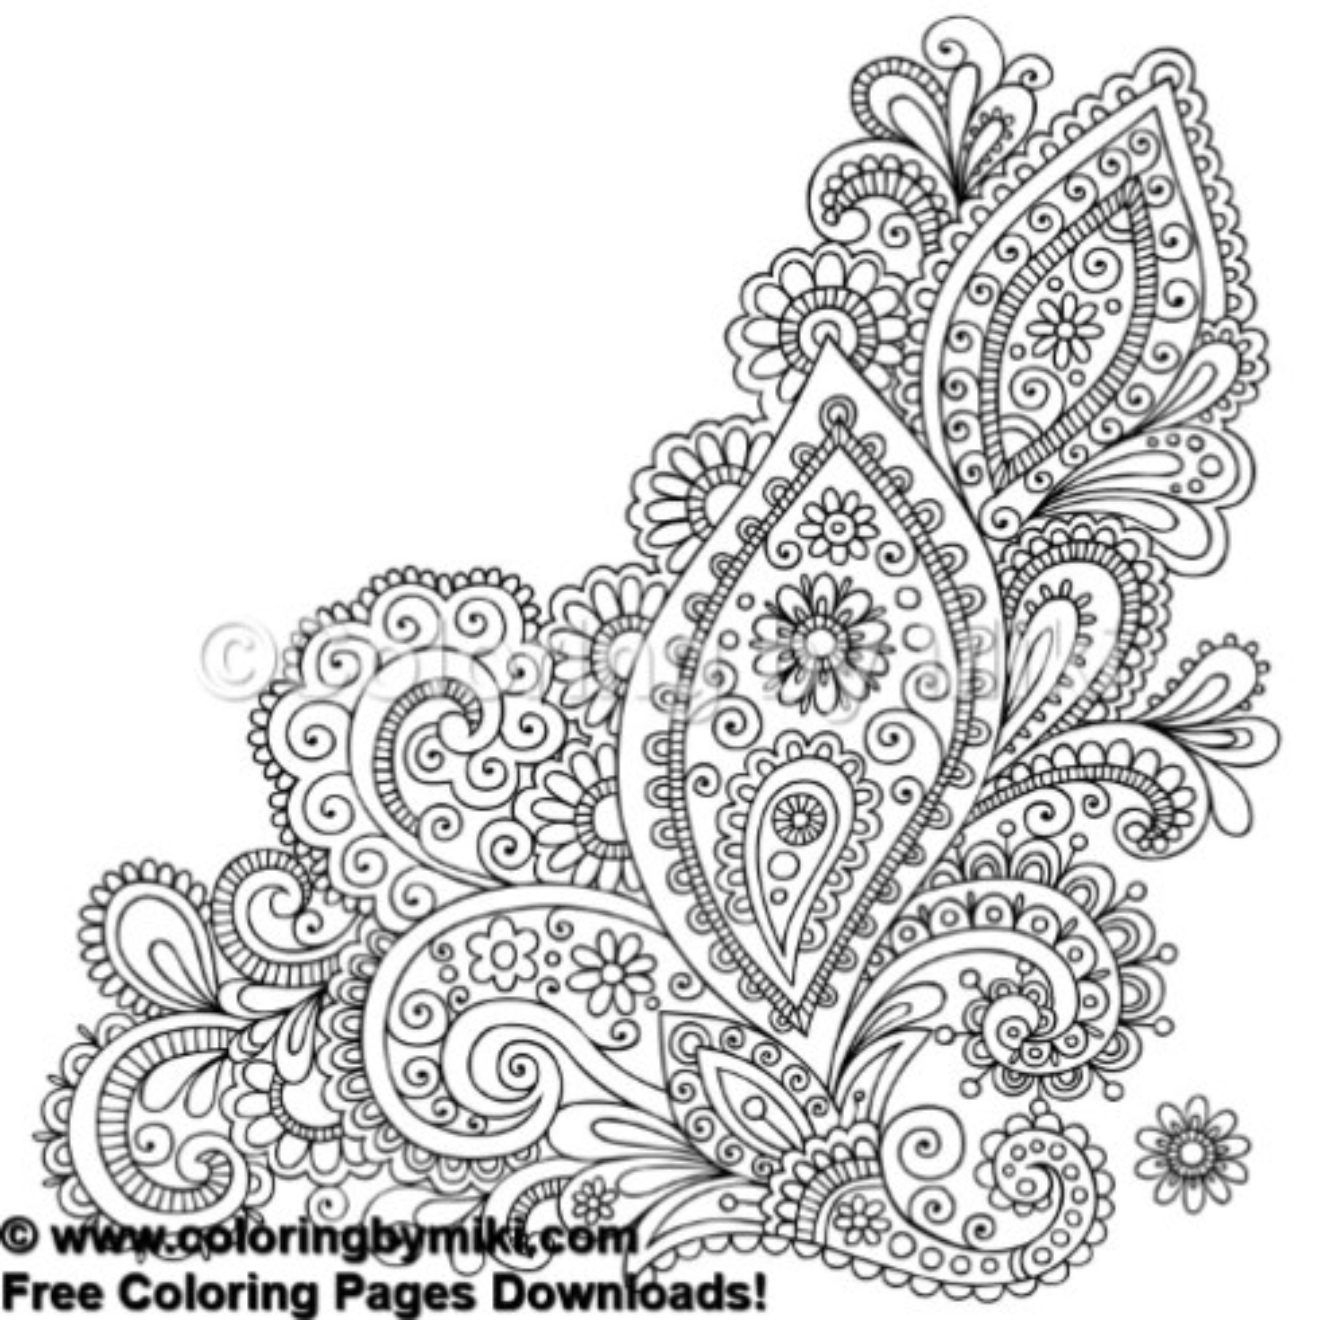 Henna Tattoo Design Coloring Page #654 | Tribal - Free Coloring - Free Printable Henna Tattoo Designs